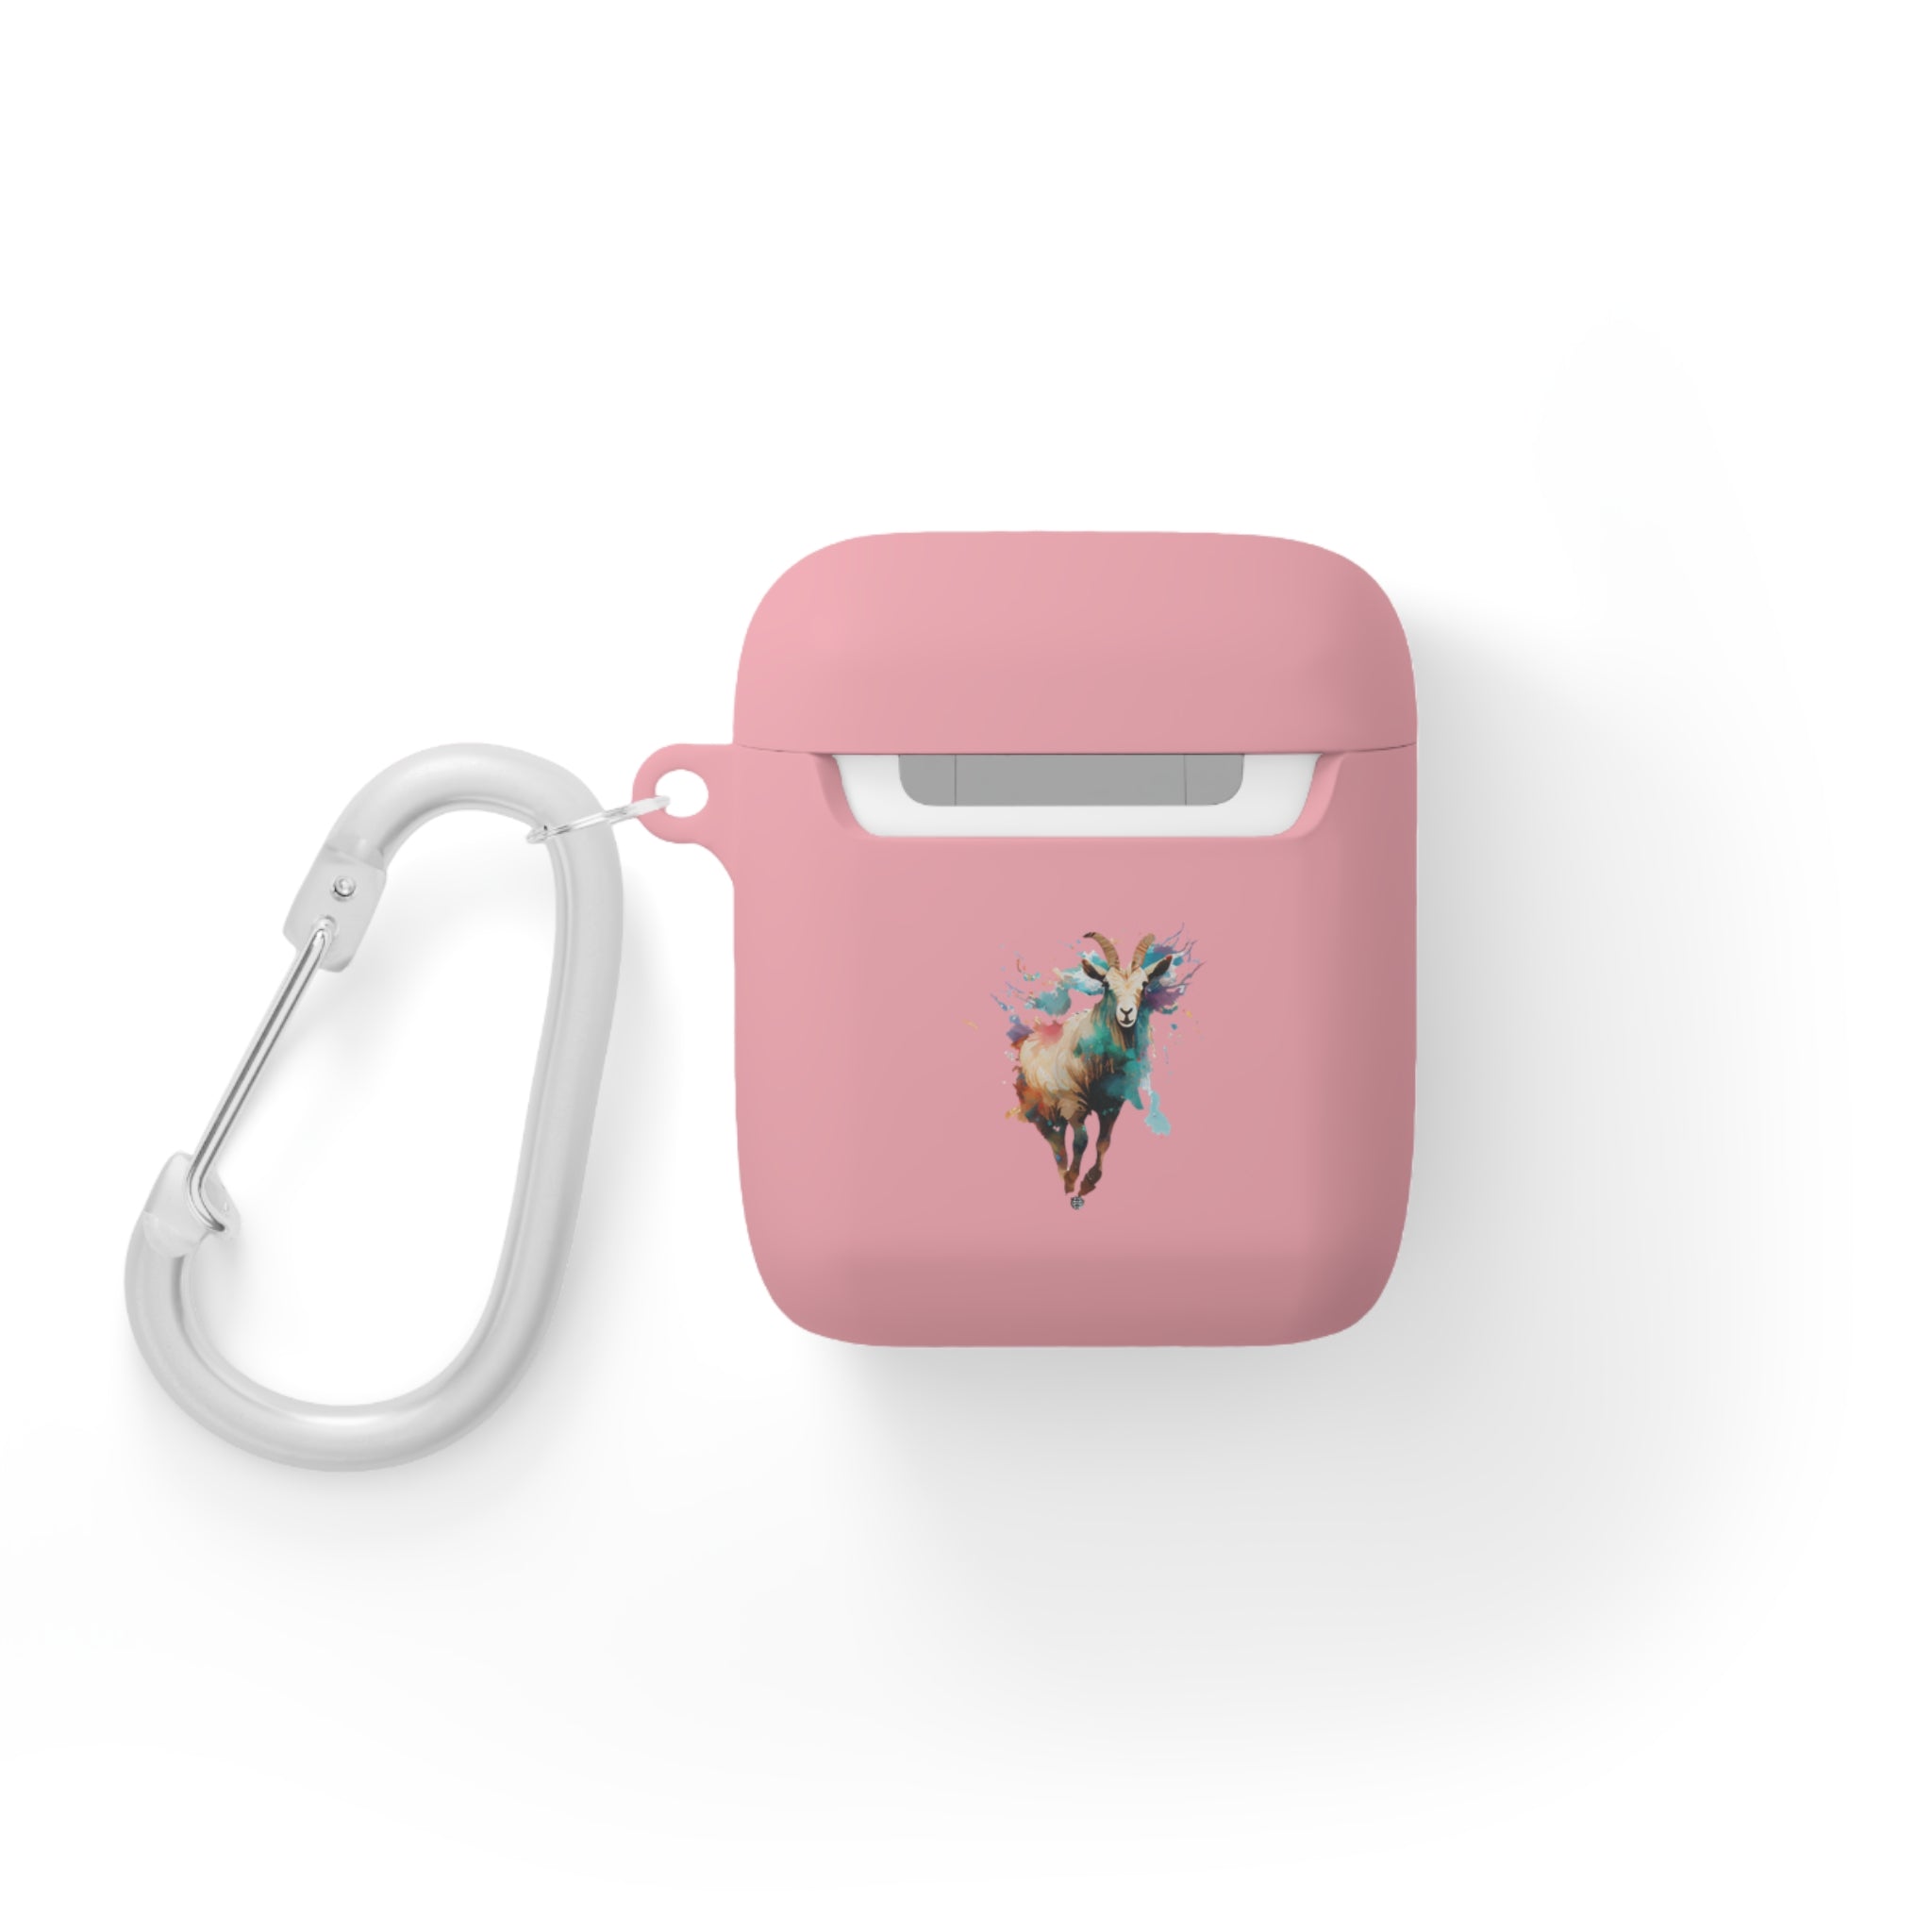 93bbbcmd Transparent Airpodscase